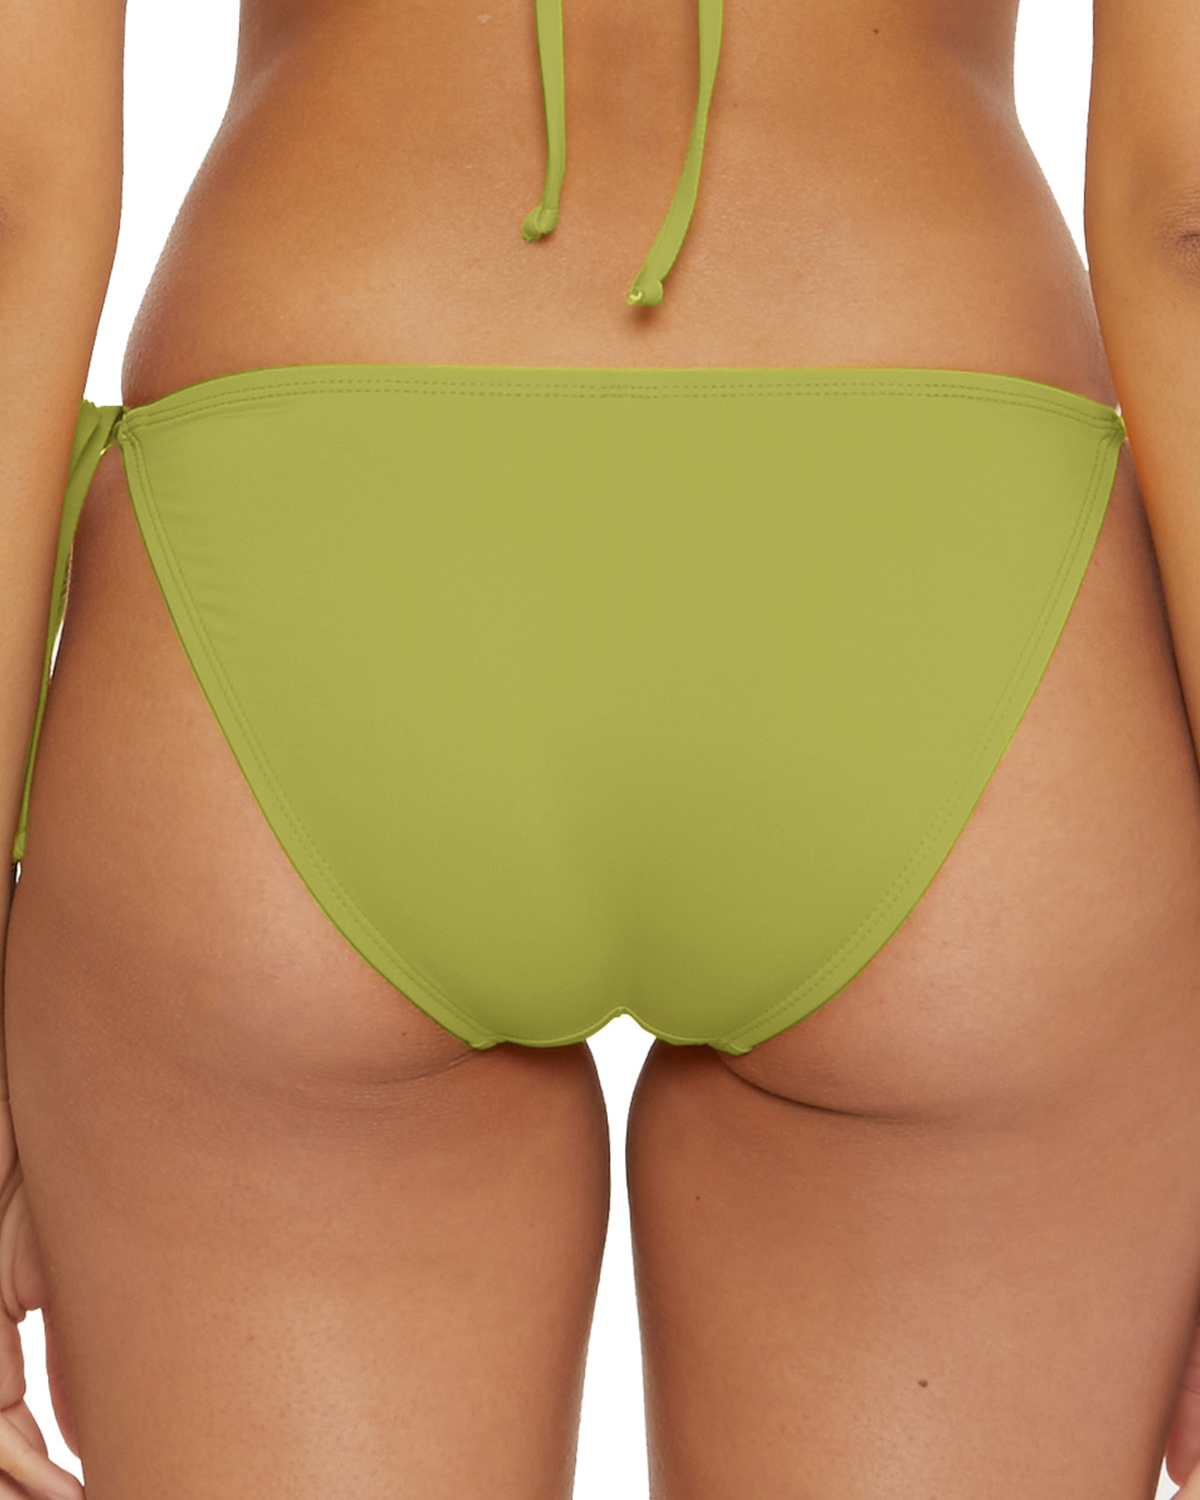 2023 BCA by Rebecca Virtue Solids Tie Side Bikini Bottom (More colors available) - 1614431